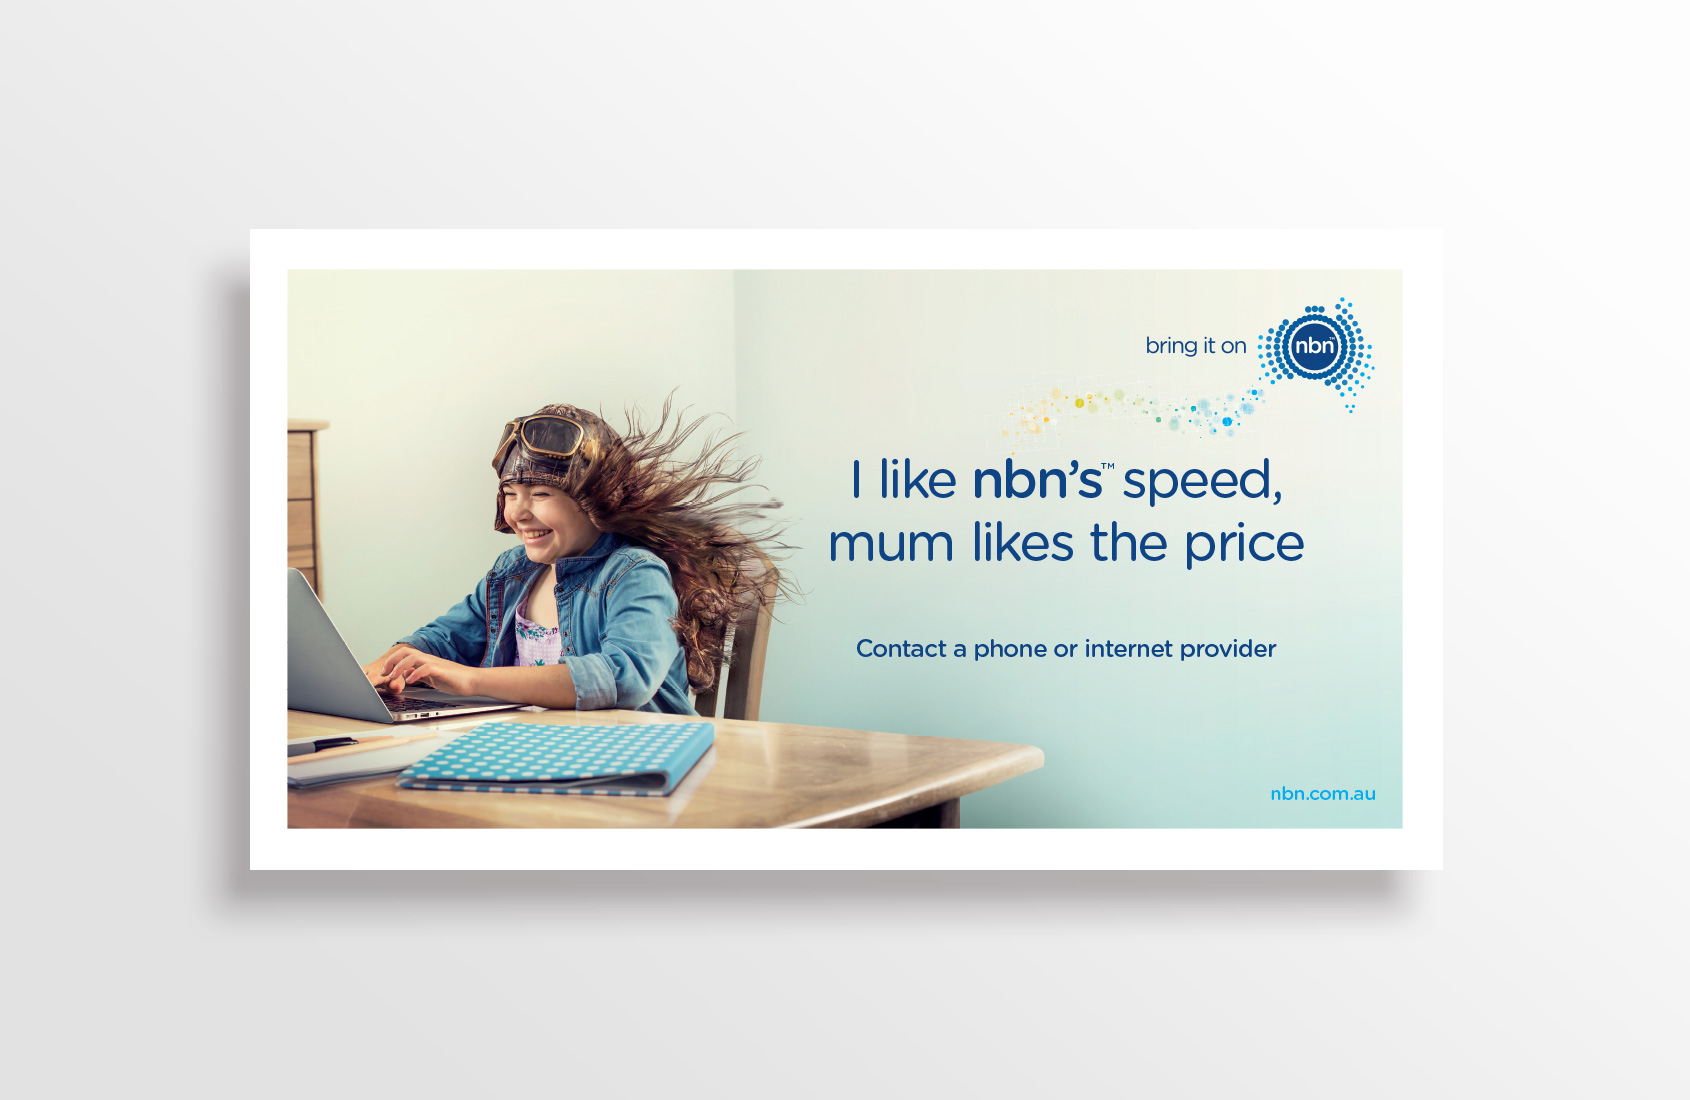 NBN bring it on relaunch Campaign - OOH speedprice